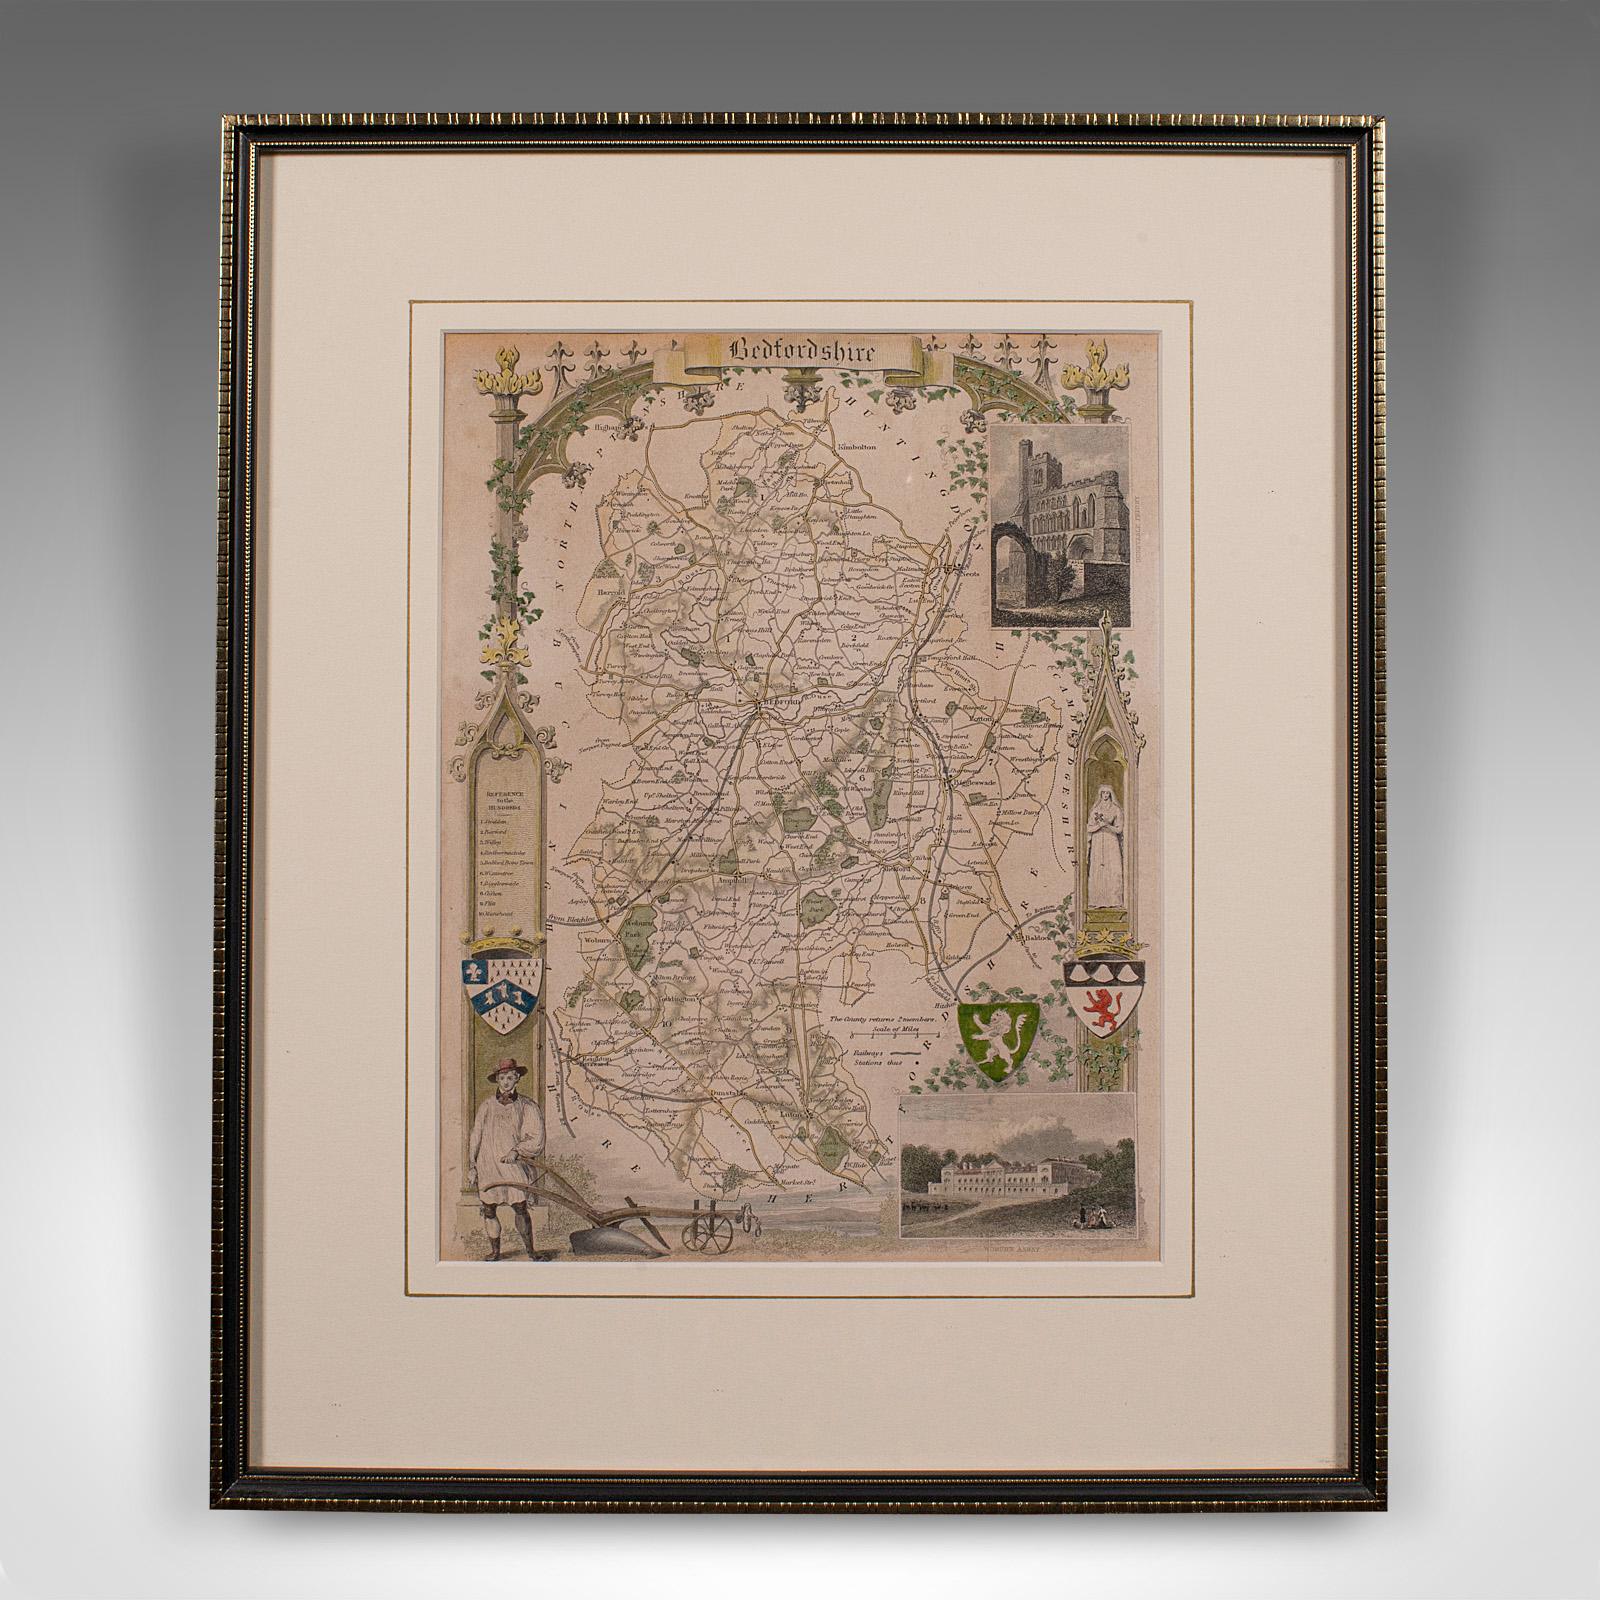 This is an antique lithography map of Bedfordshire. An English, framed atlas engraving of cartographic interest, dating to the mid 19th century and later.

Superb lithography of Bedfordshire and its county detail, perfect for display
Displaying a